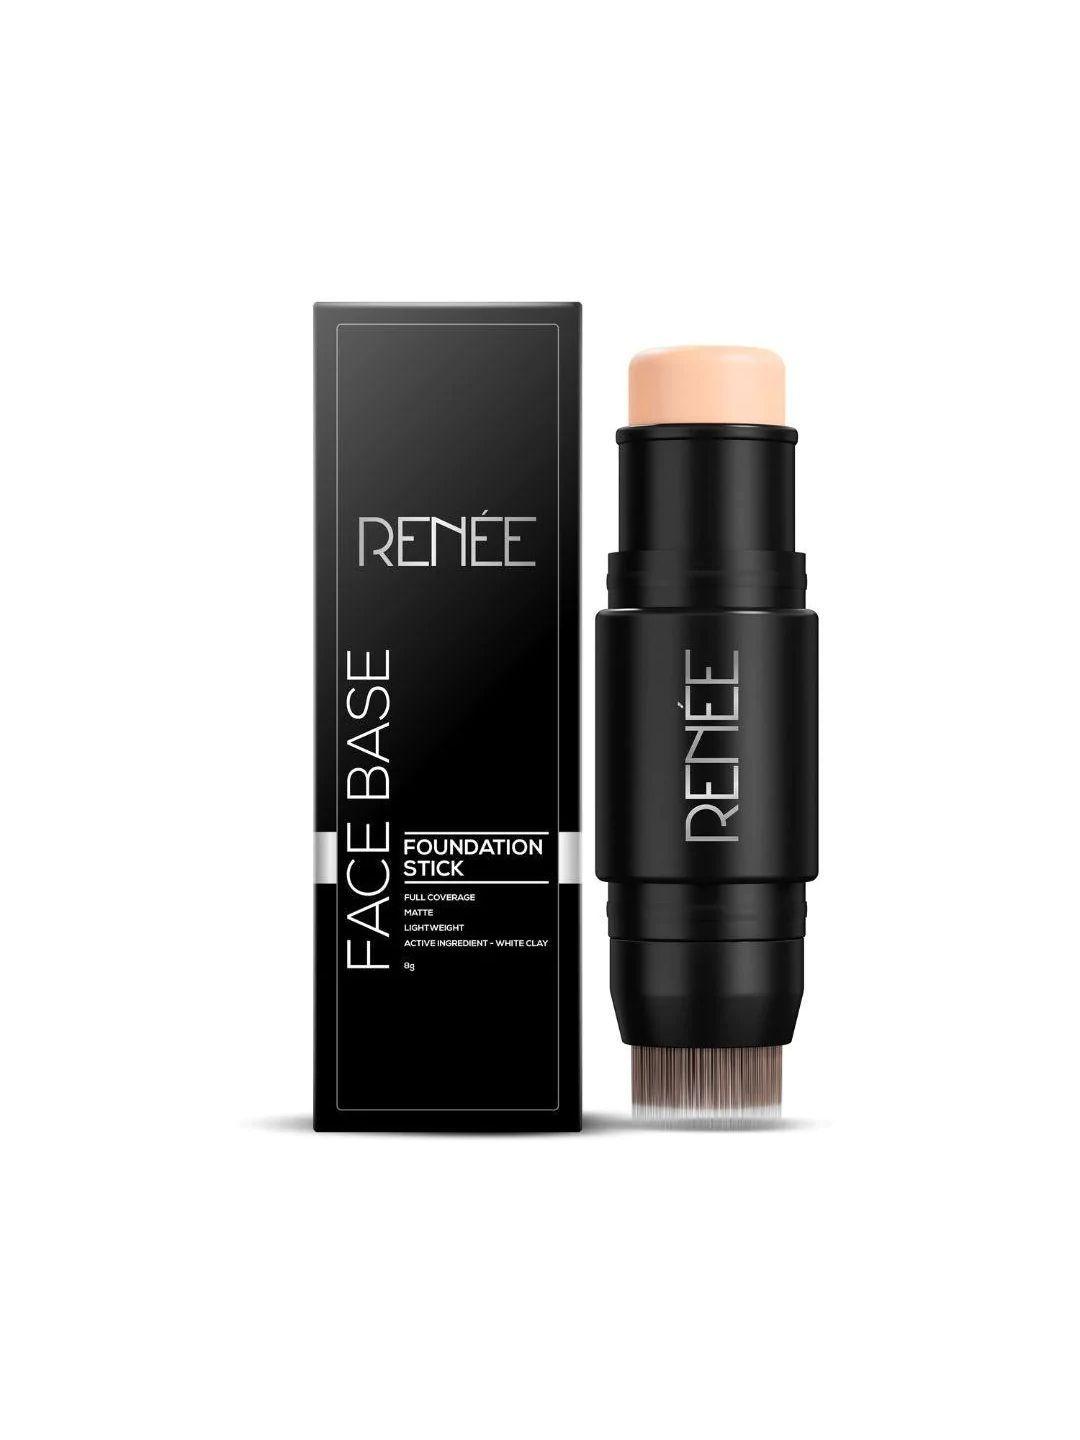 renee face base foundation stick with applicator - cappuccino 8g